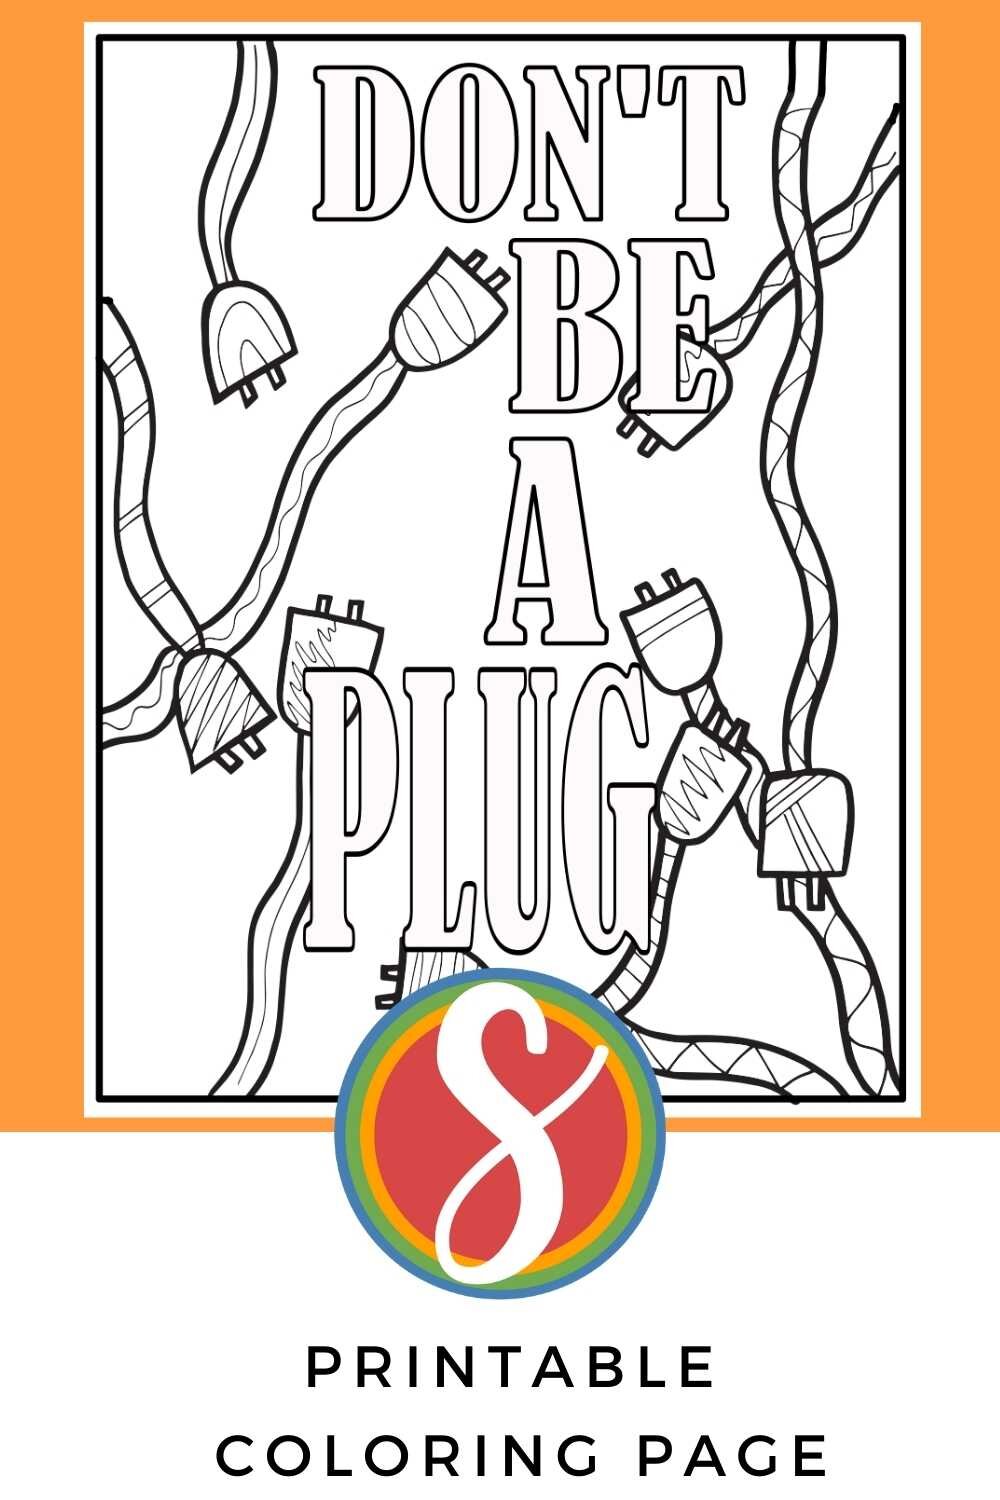 Don’t Be A Plug- Free Printable Coloring Page CLICK HERE TO DOWNLOAD THE PAGE ABOVE!